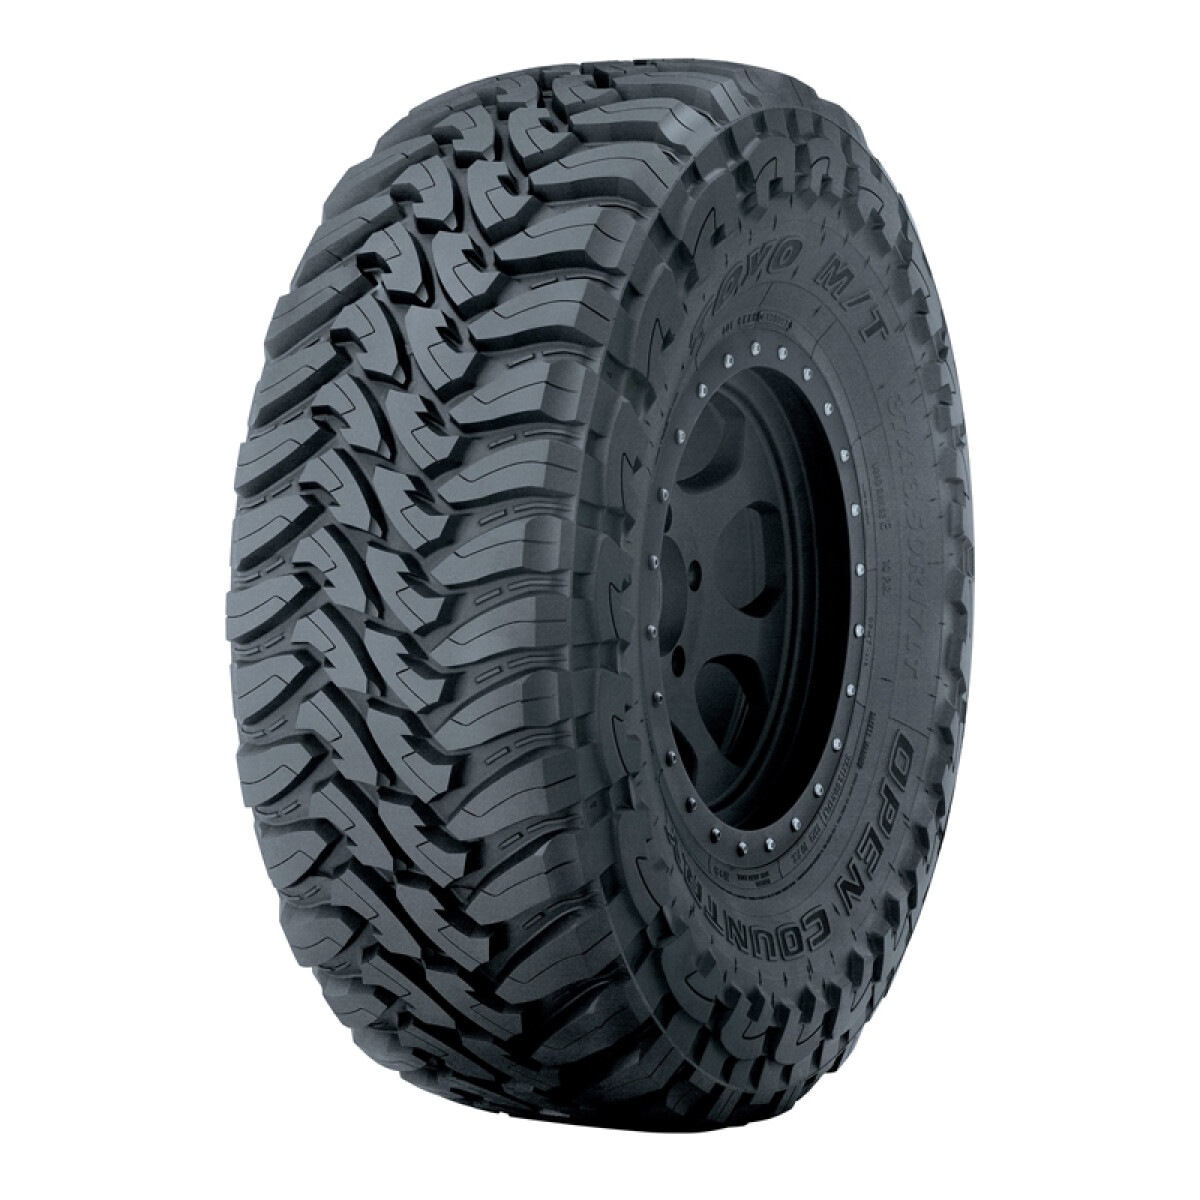 CUBIERTA NEUMATICO TOYO OPEN COUNTRY AT+ 195/80R15 96H 